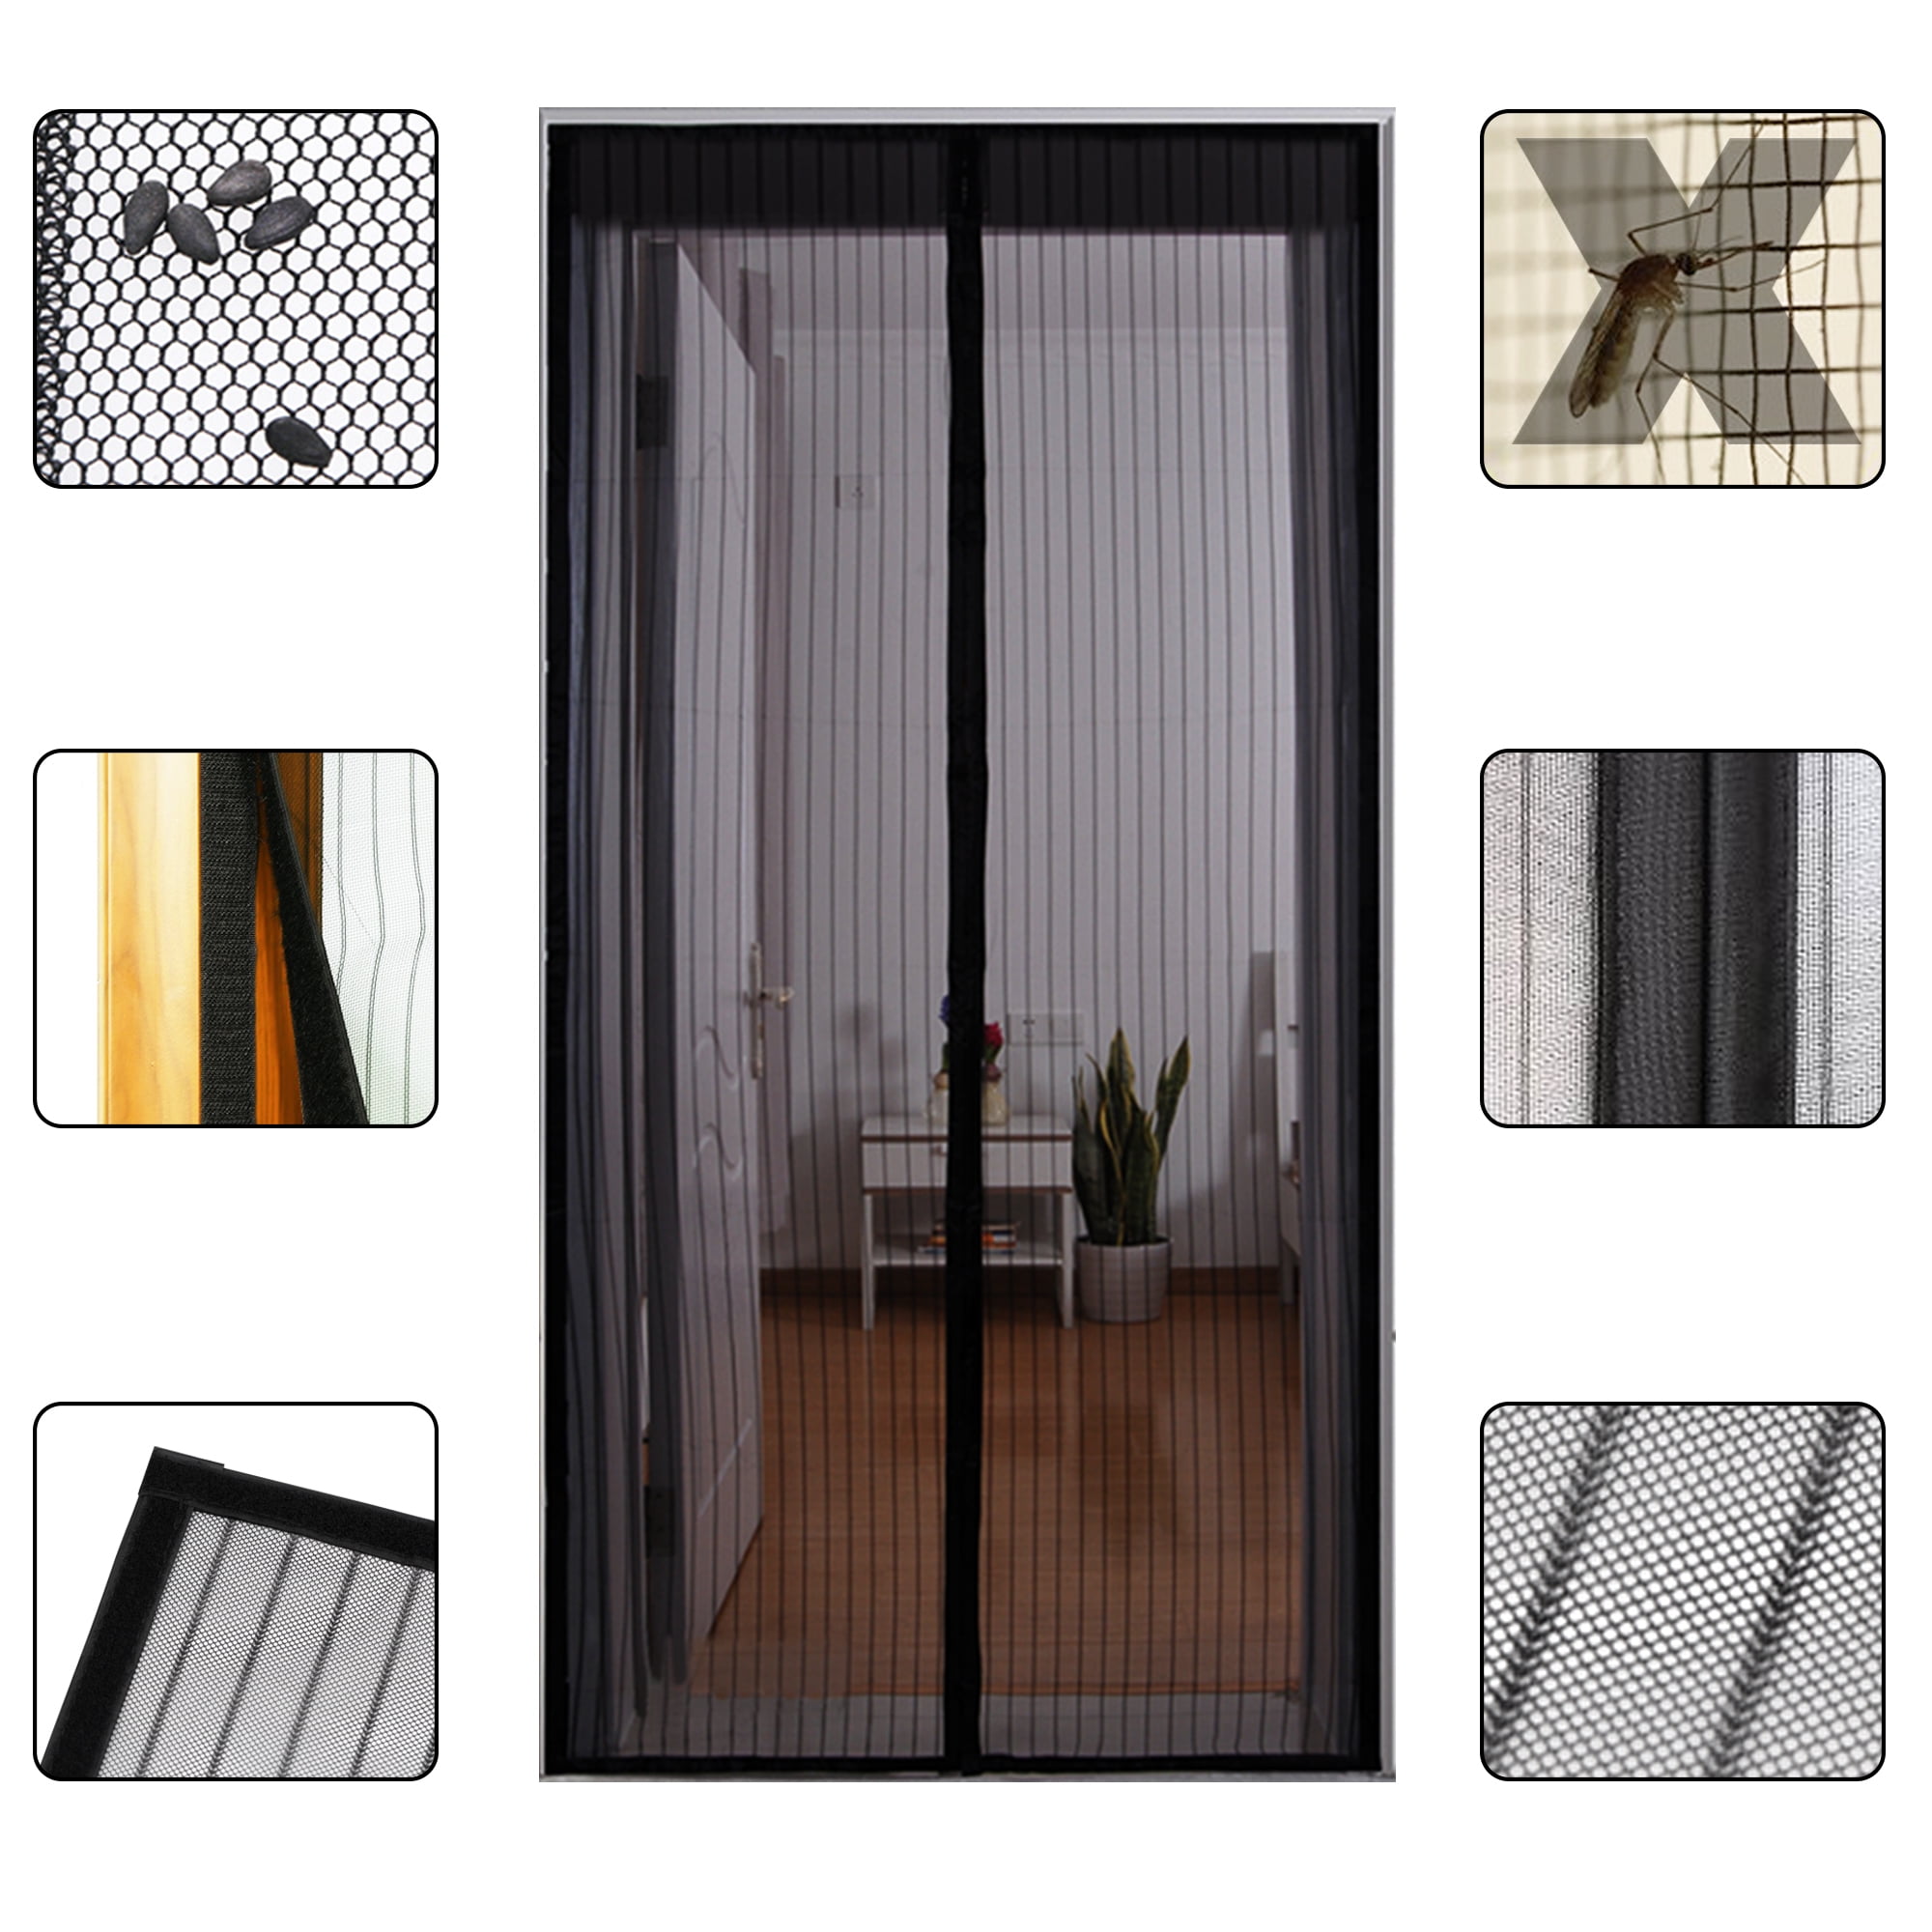 M/L Mosquito Insect Net Mesh Guard For Doors Windows Fly screen Curtain Netting 